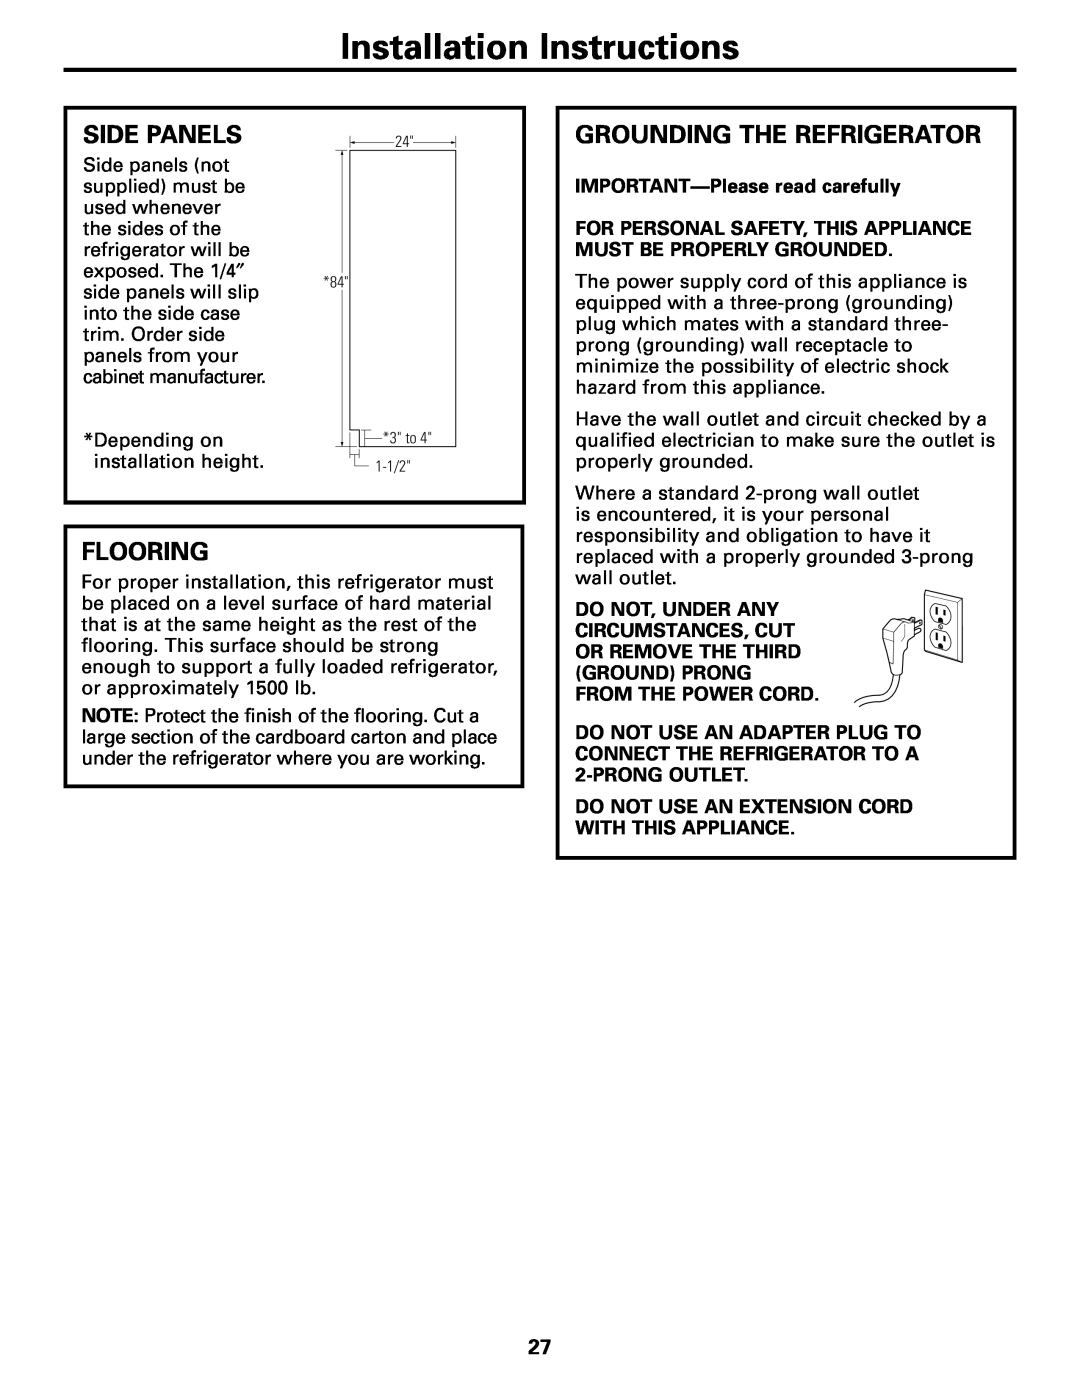 GE 48, 42 Side Panels, Grounding The Refrigerator, Flooring, Installation Instructions, IMPORTANT-Please read carefully 